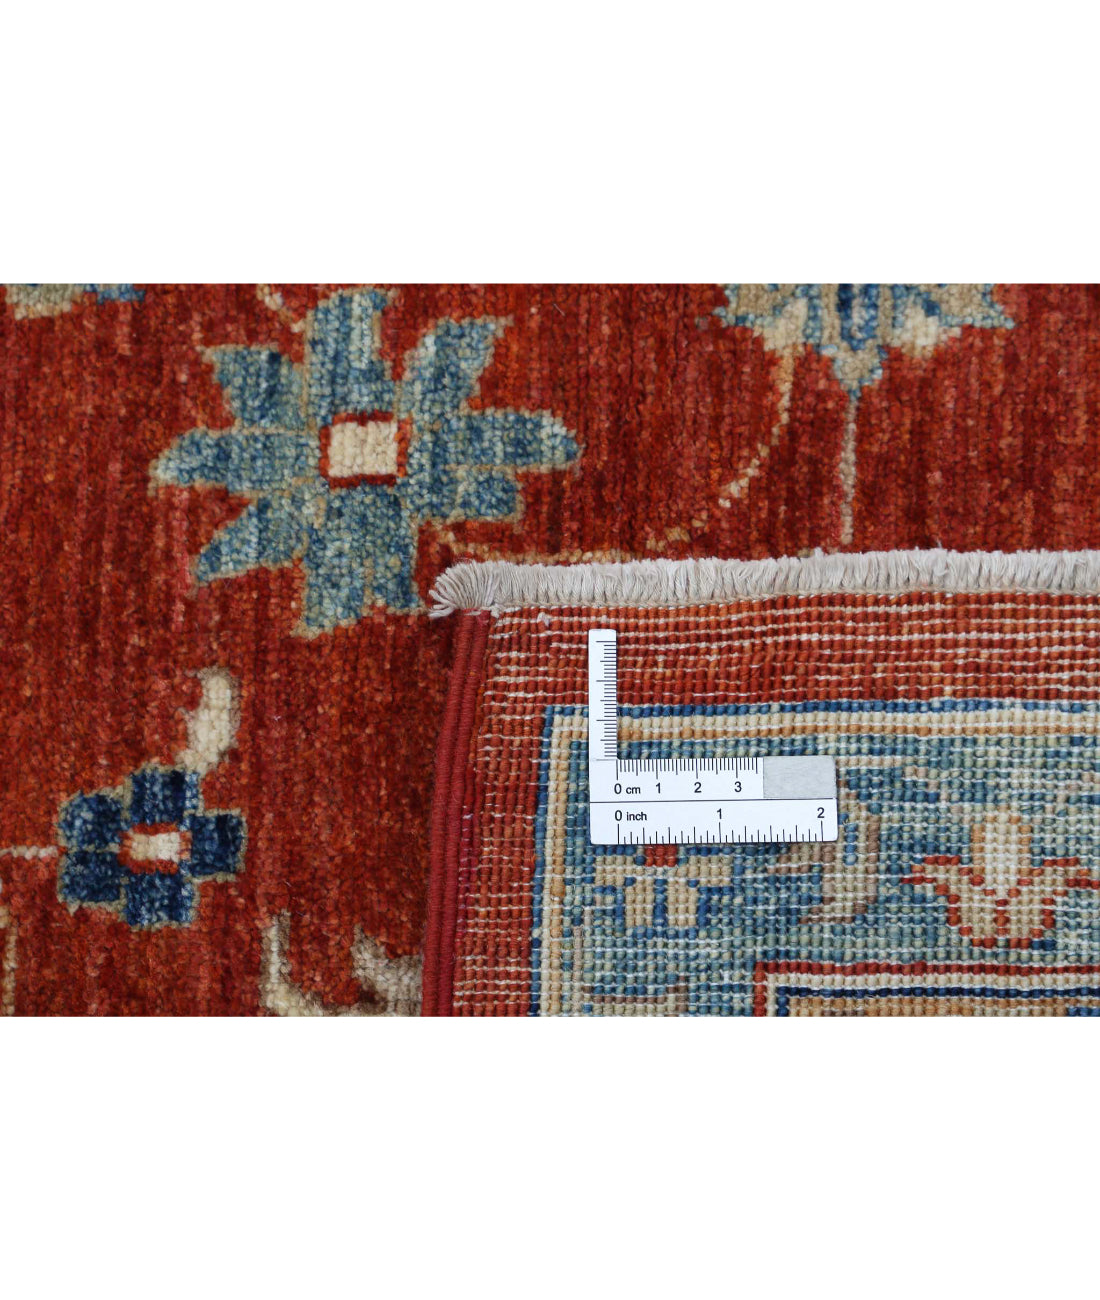 Ziegler 8'4'' X 9'9'' Hand-Knotted Wool Rug 8'4'' x 9'9'' (250 X 293) / Red / Blue